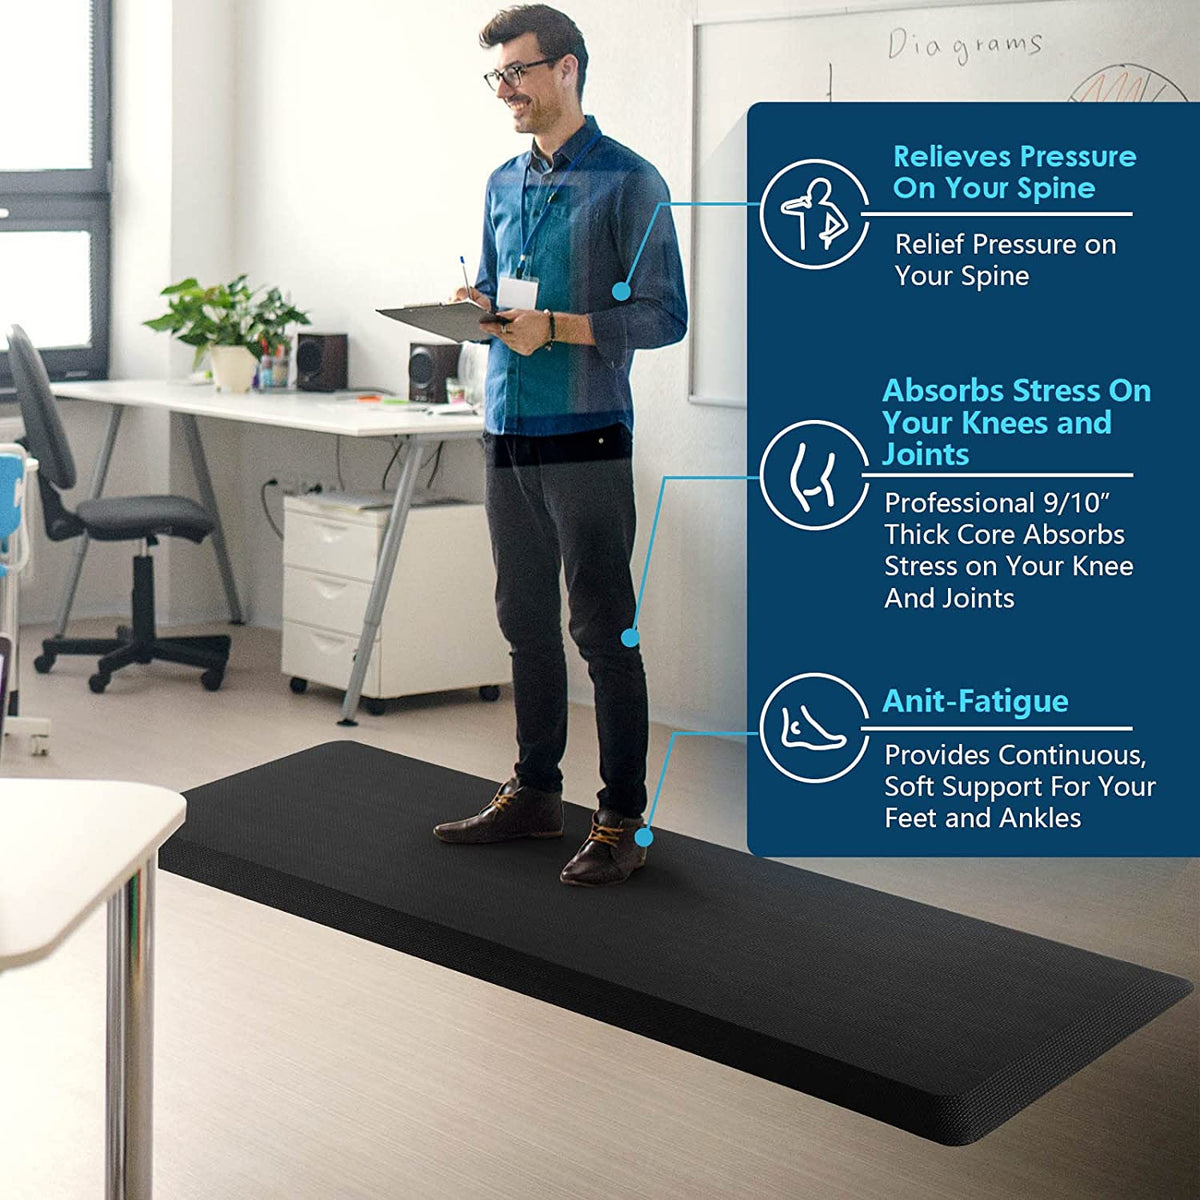 Reduce your discomfort when standing with these anti-fatigue mats – Daily  Press